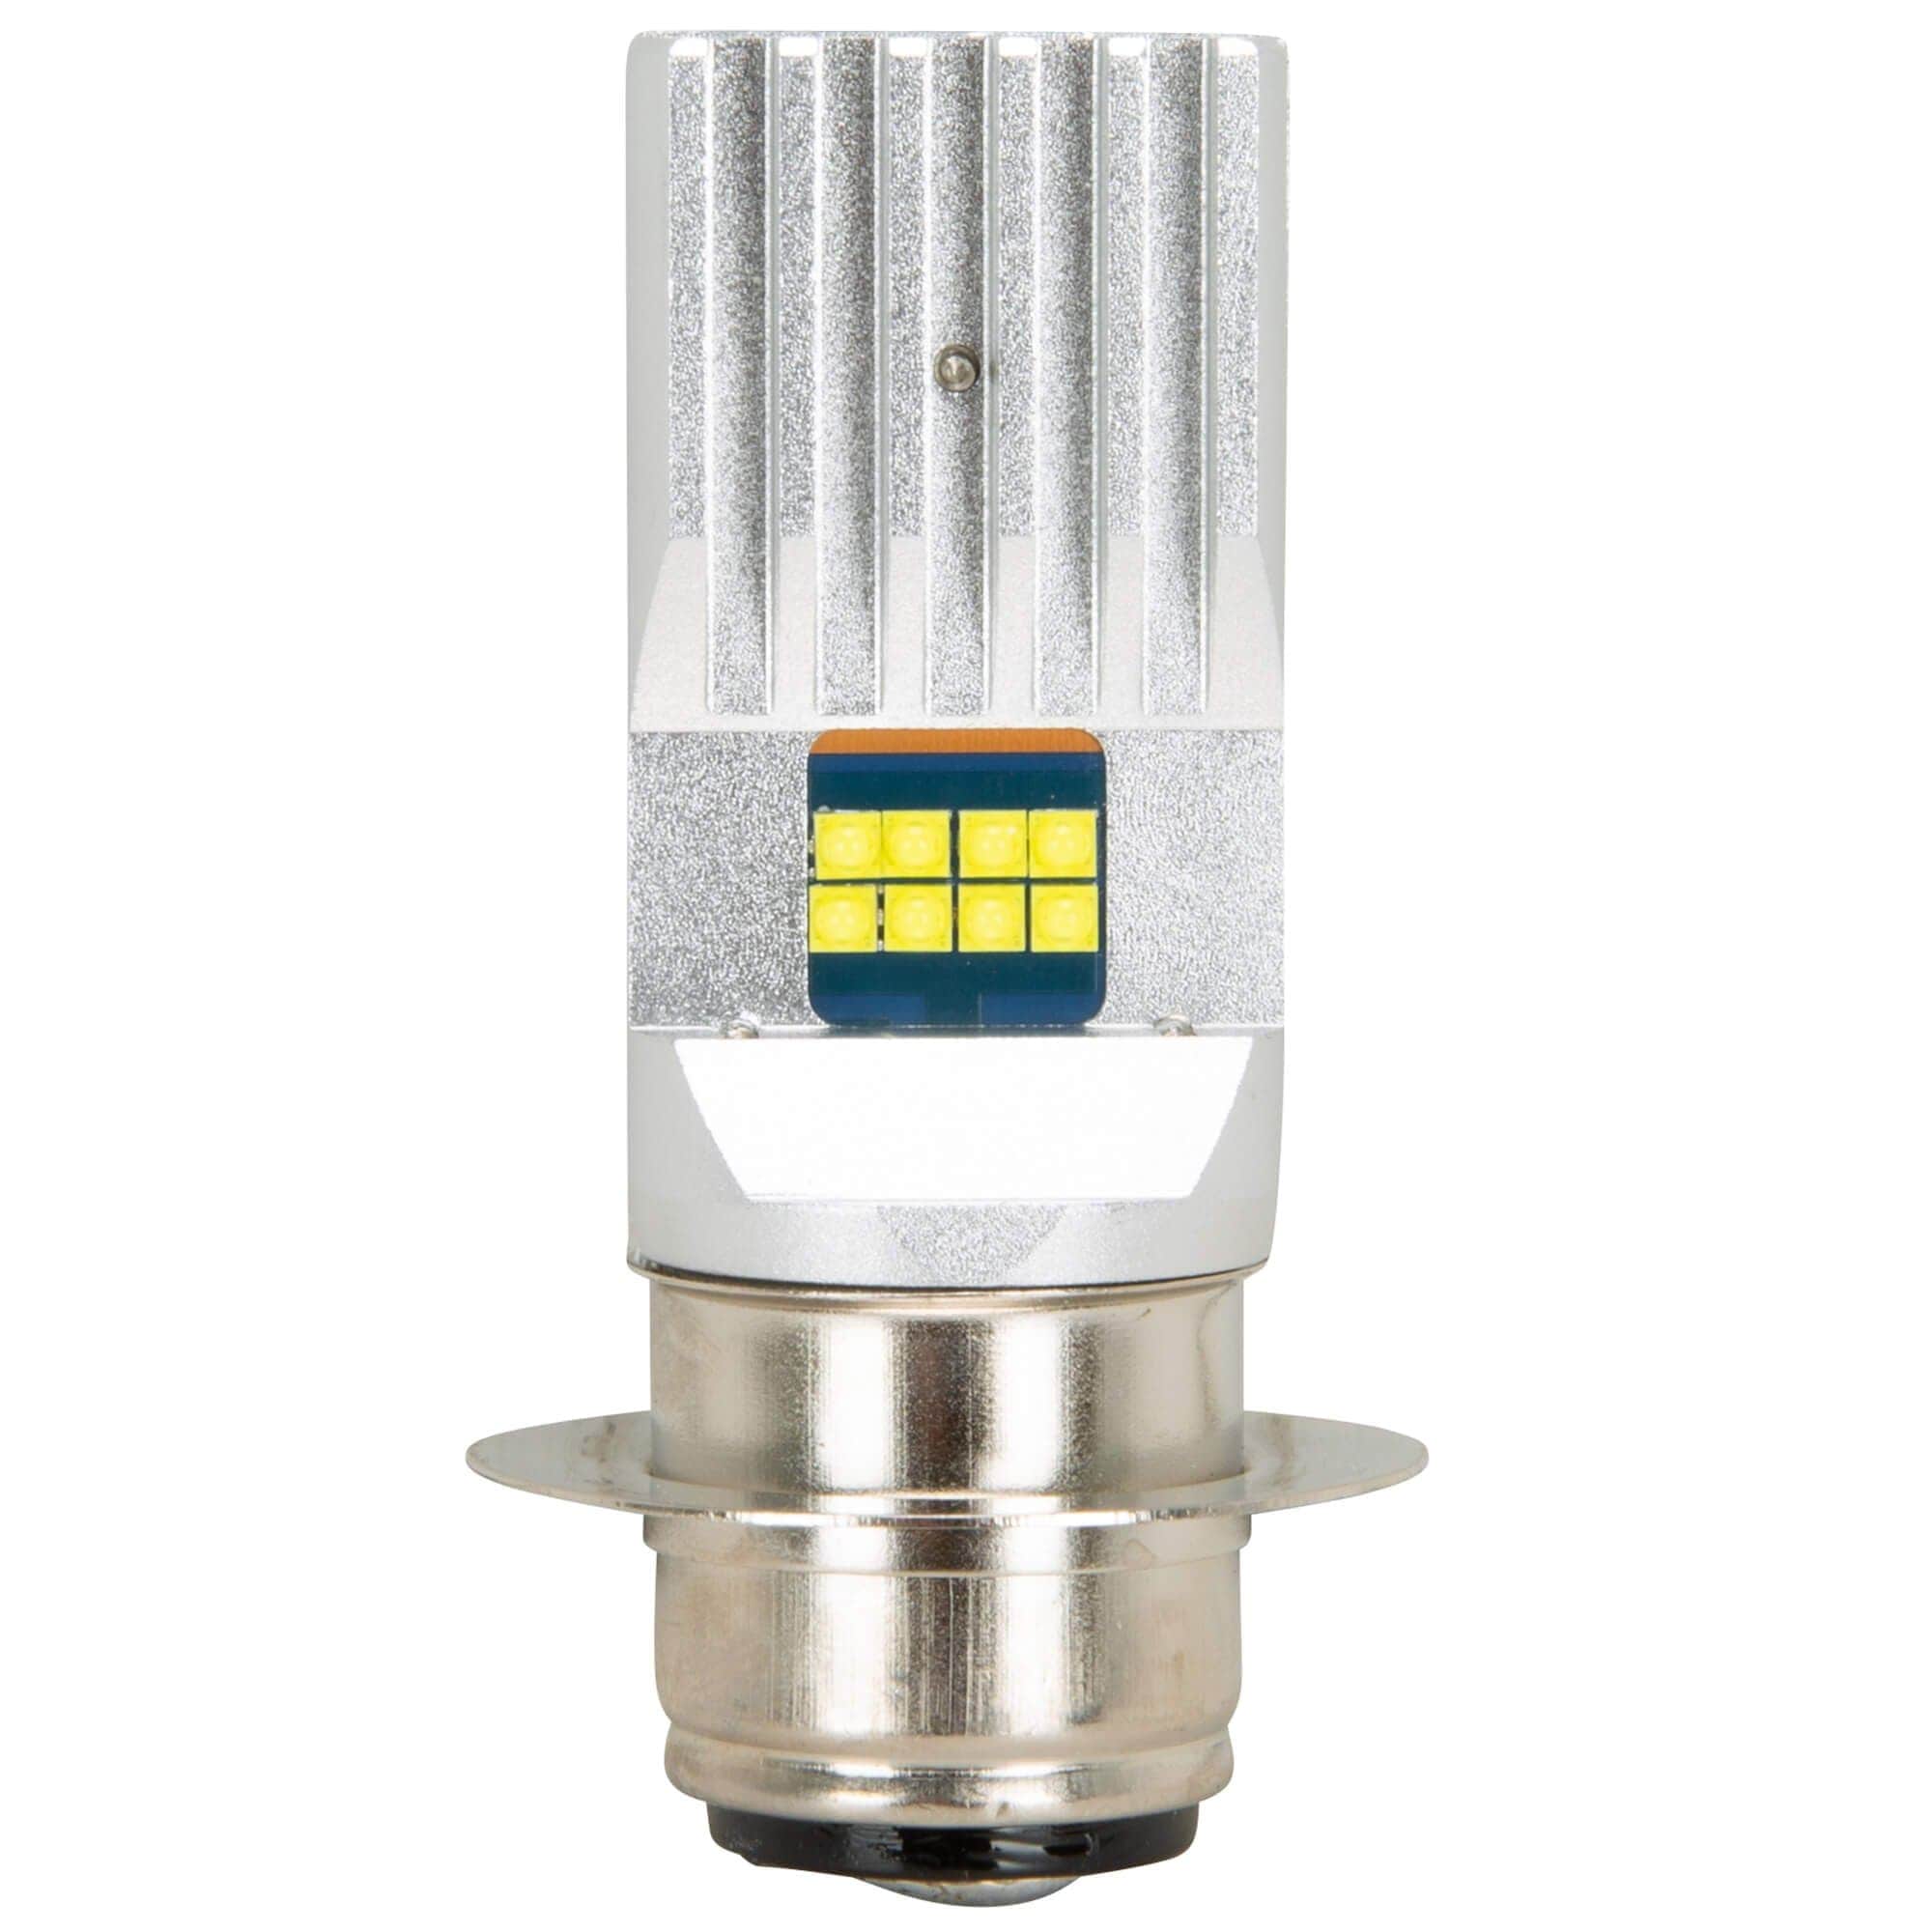 Osram adds an LED bulb replacement for headlights, but there's a price